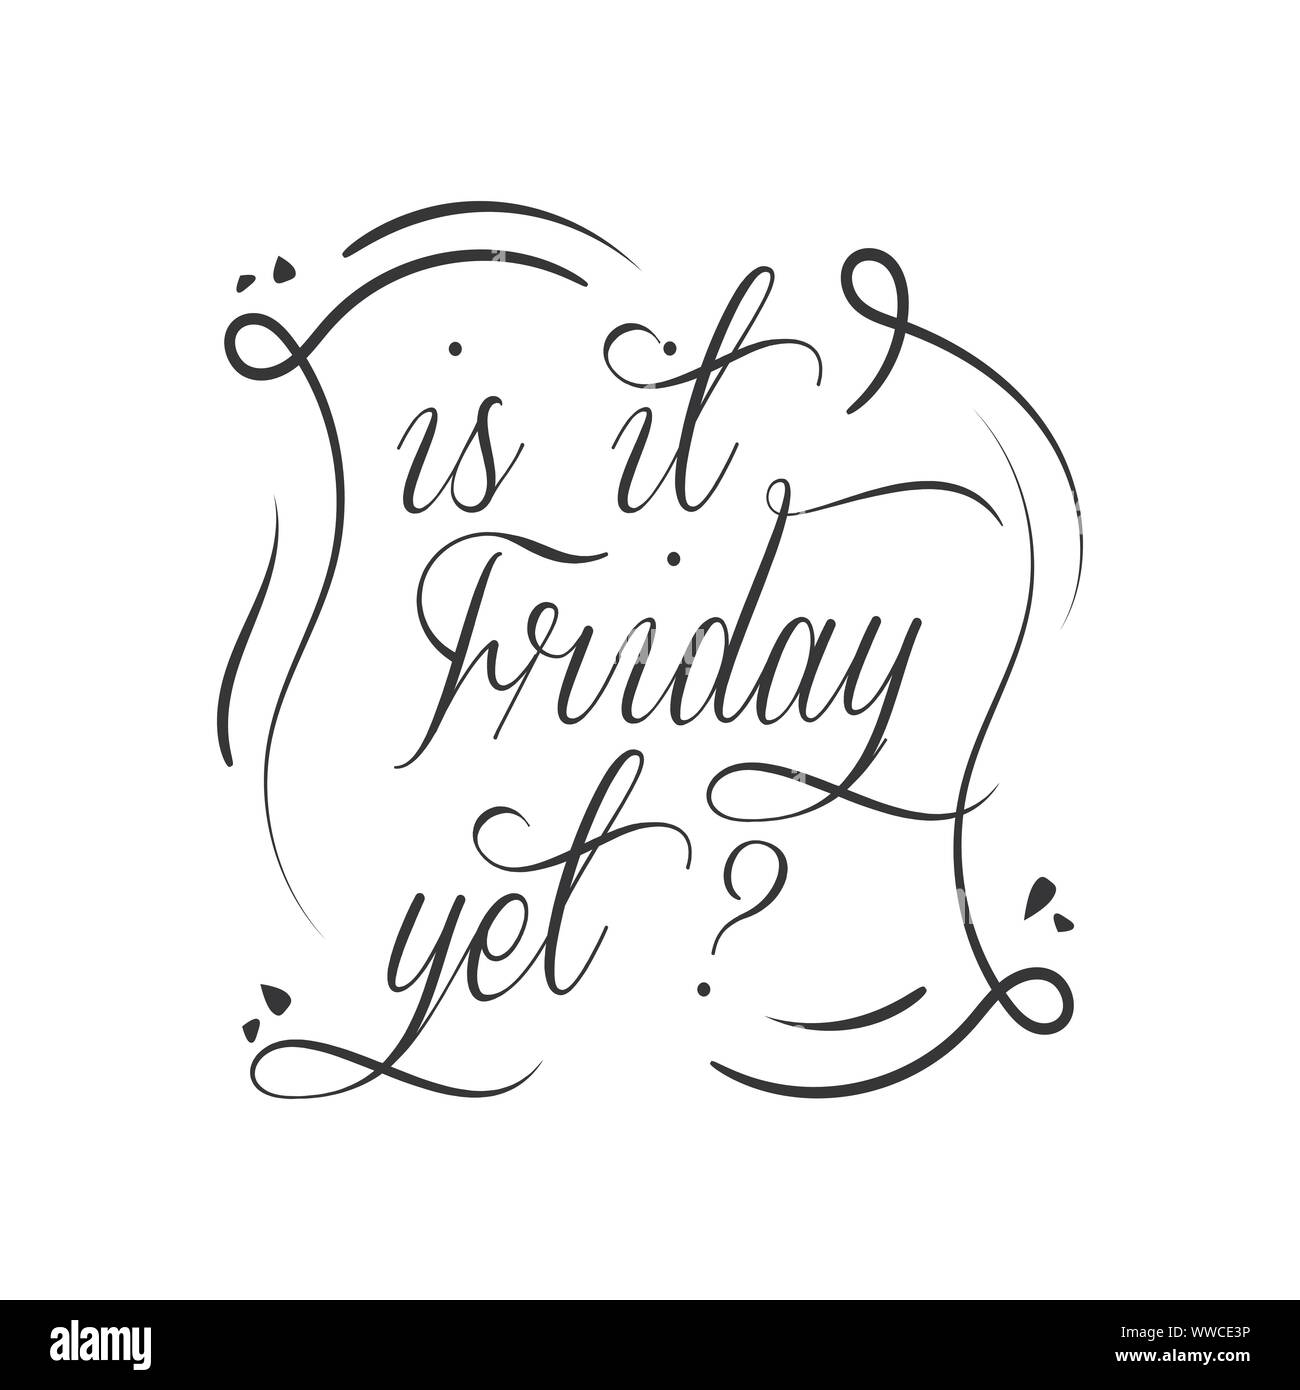 Is it friday yet lettering quote Vector Hand drawn friday quote positive illustration Stock Vector